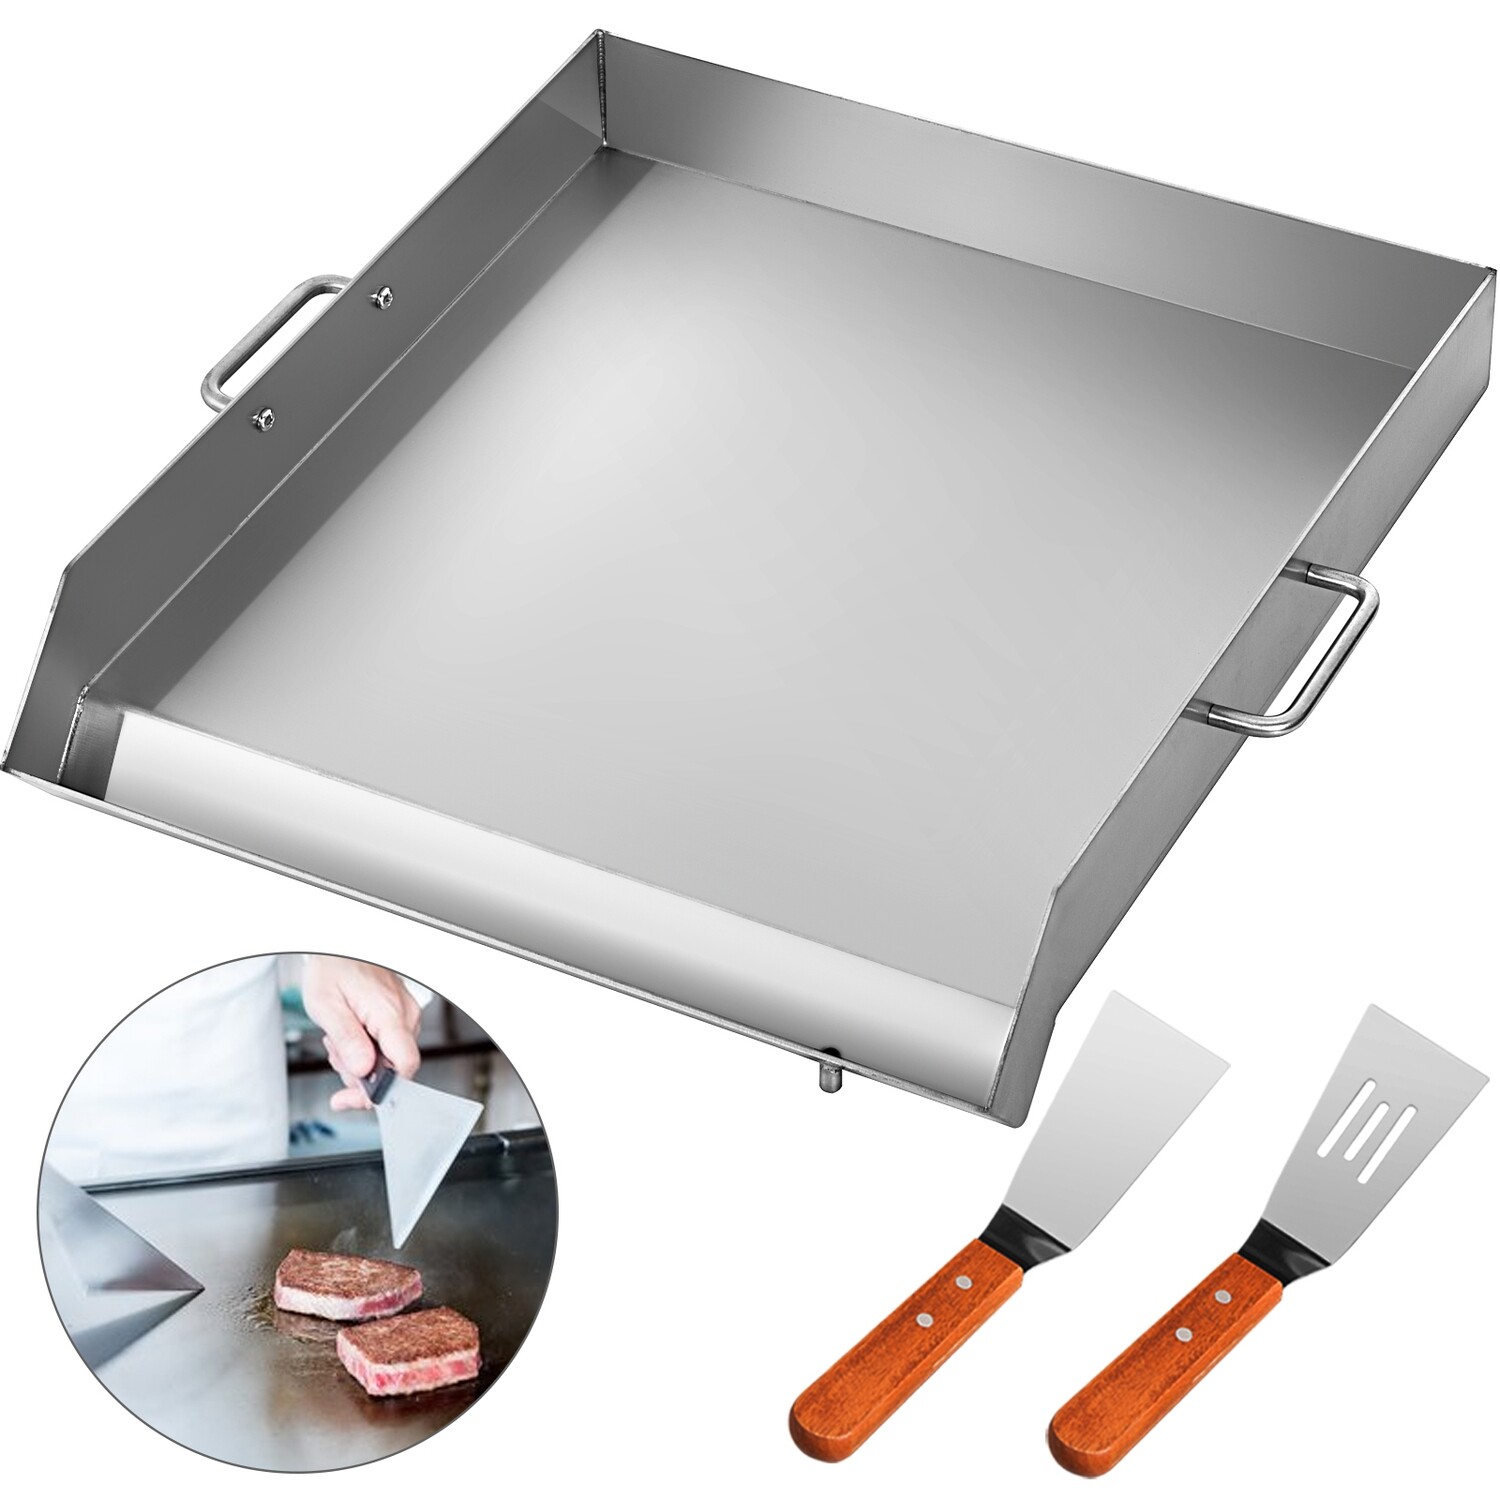 16 x 18-inch square grill plate made of stainless steel, flat